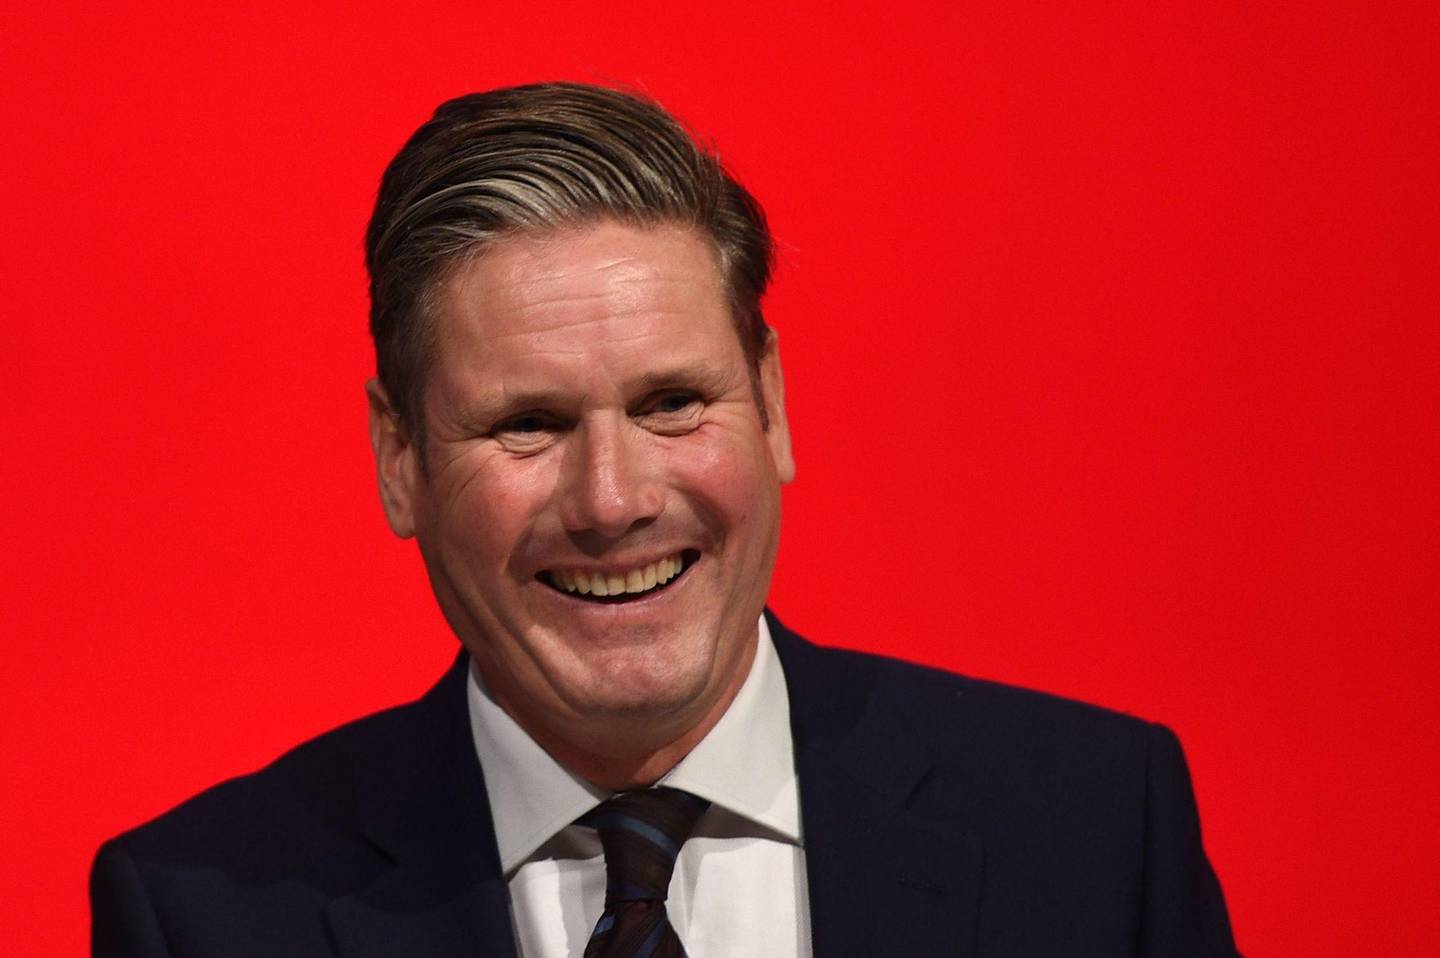 Britain's opposition Labour party Brexit secretary Keir Starmer addresses delegates on the third day of the Labour party conference in Liverpool, north west England on September 25, 2018. (Photo by Oli SCARFF / AFP)